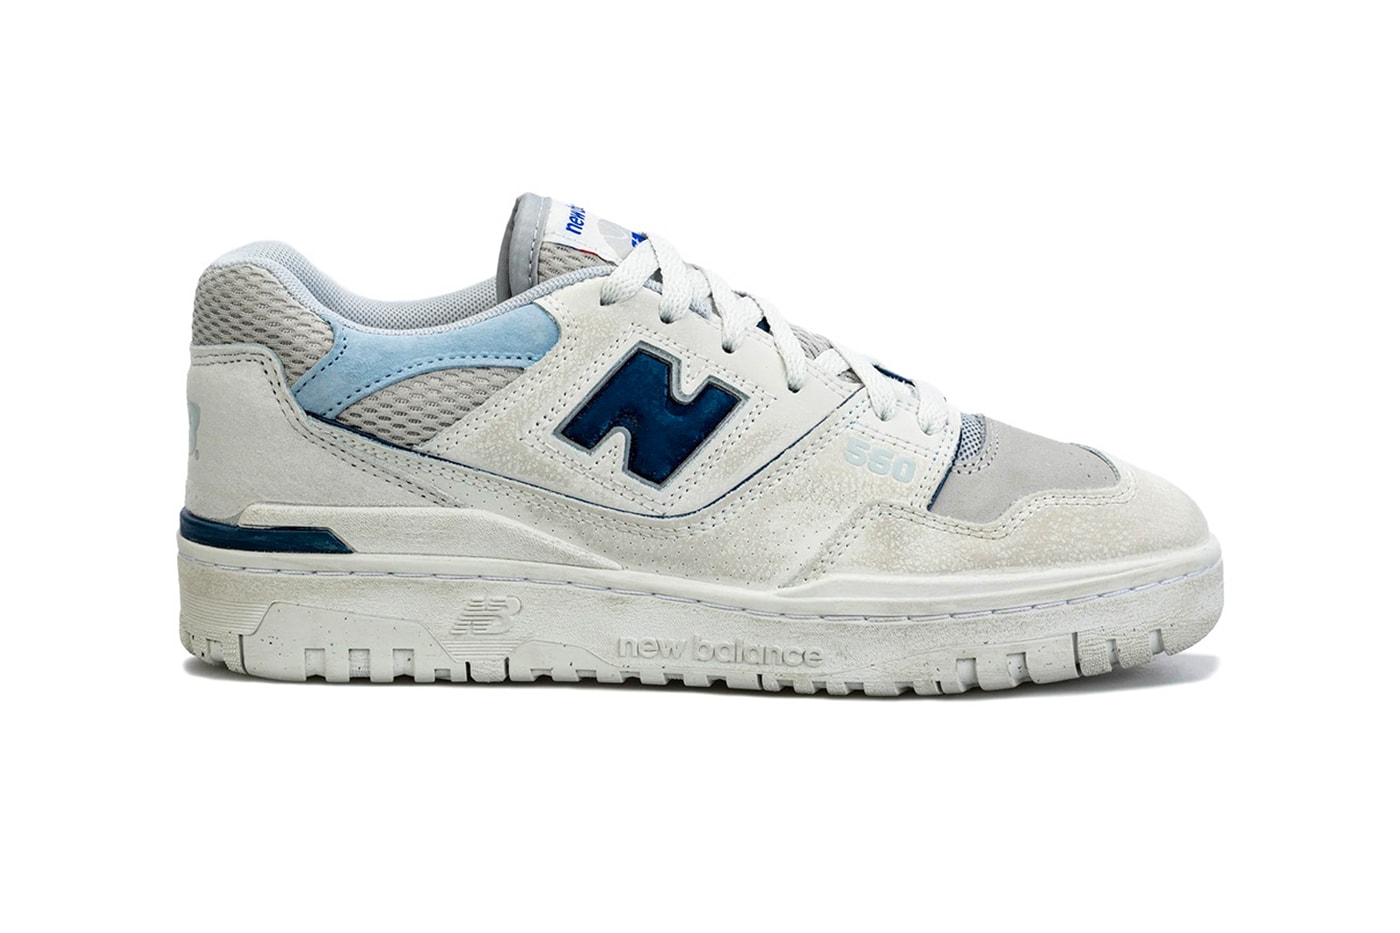 New Balance 550 Weathered White Grey Blue Release Info BB550GD1 Date Buy Price 